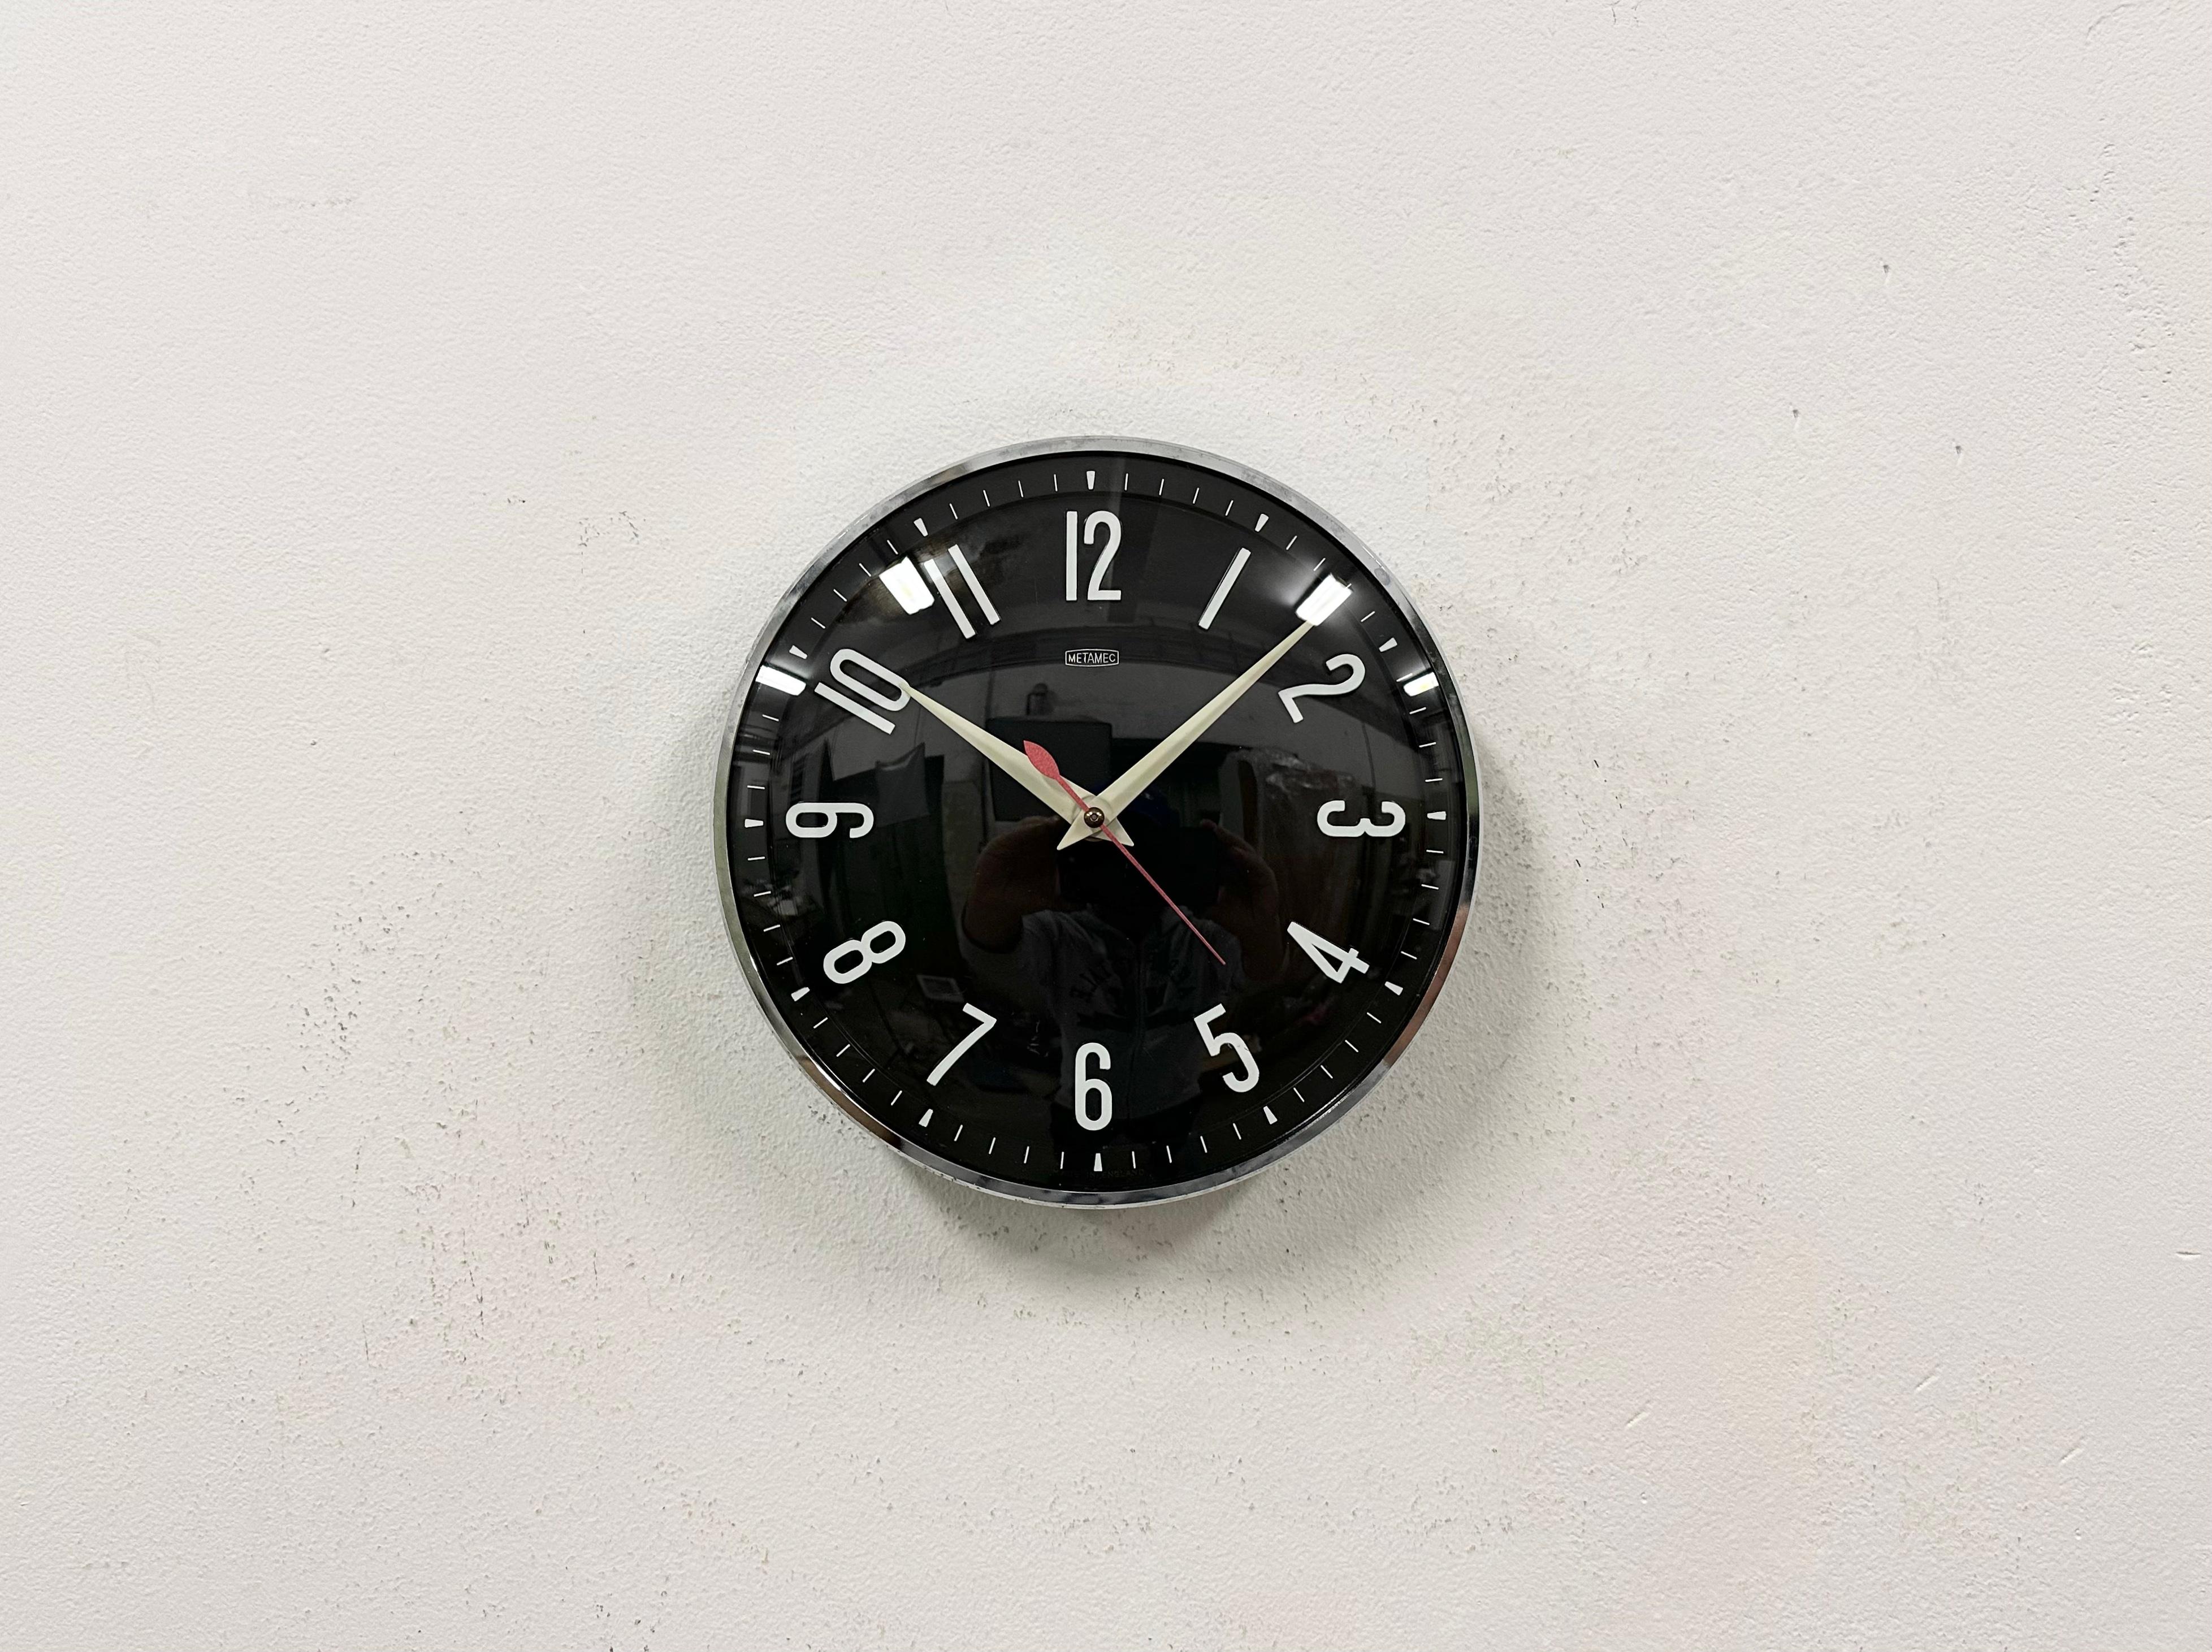 Metamec wall clock was made in United Kingdom during the 1970s. It features a black bakelite body with chrome ring, an aluminium hands and a curved clear glass cover. Original electric movement ( 220 V ) works perfectly . The diameter of the clock